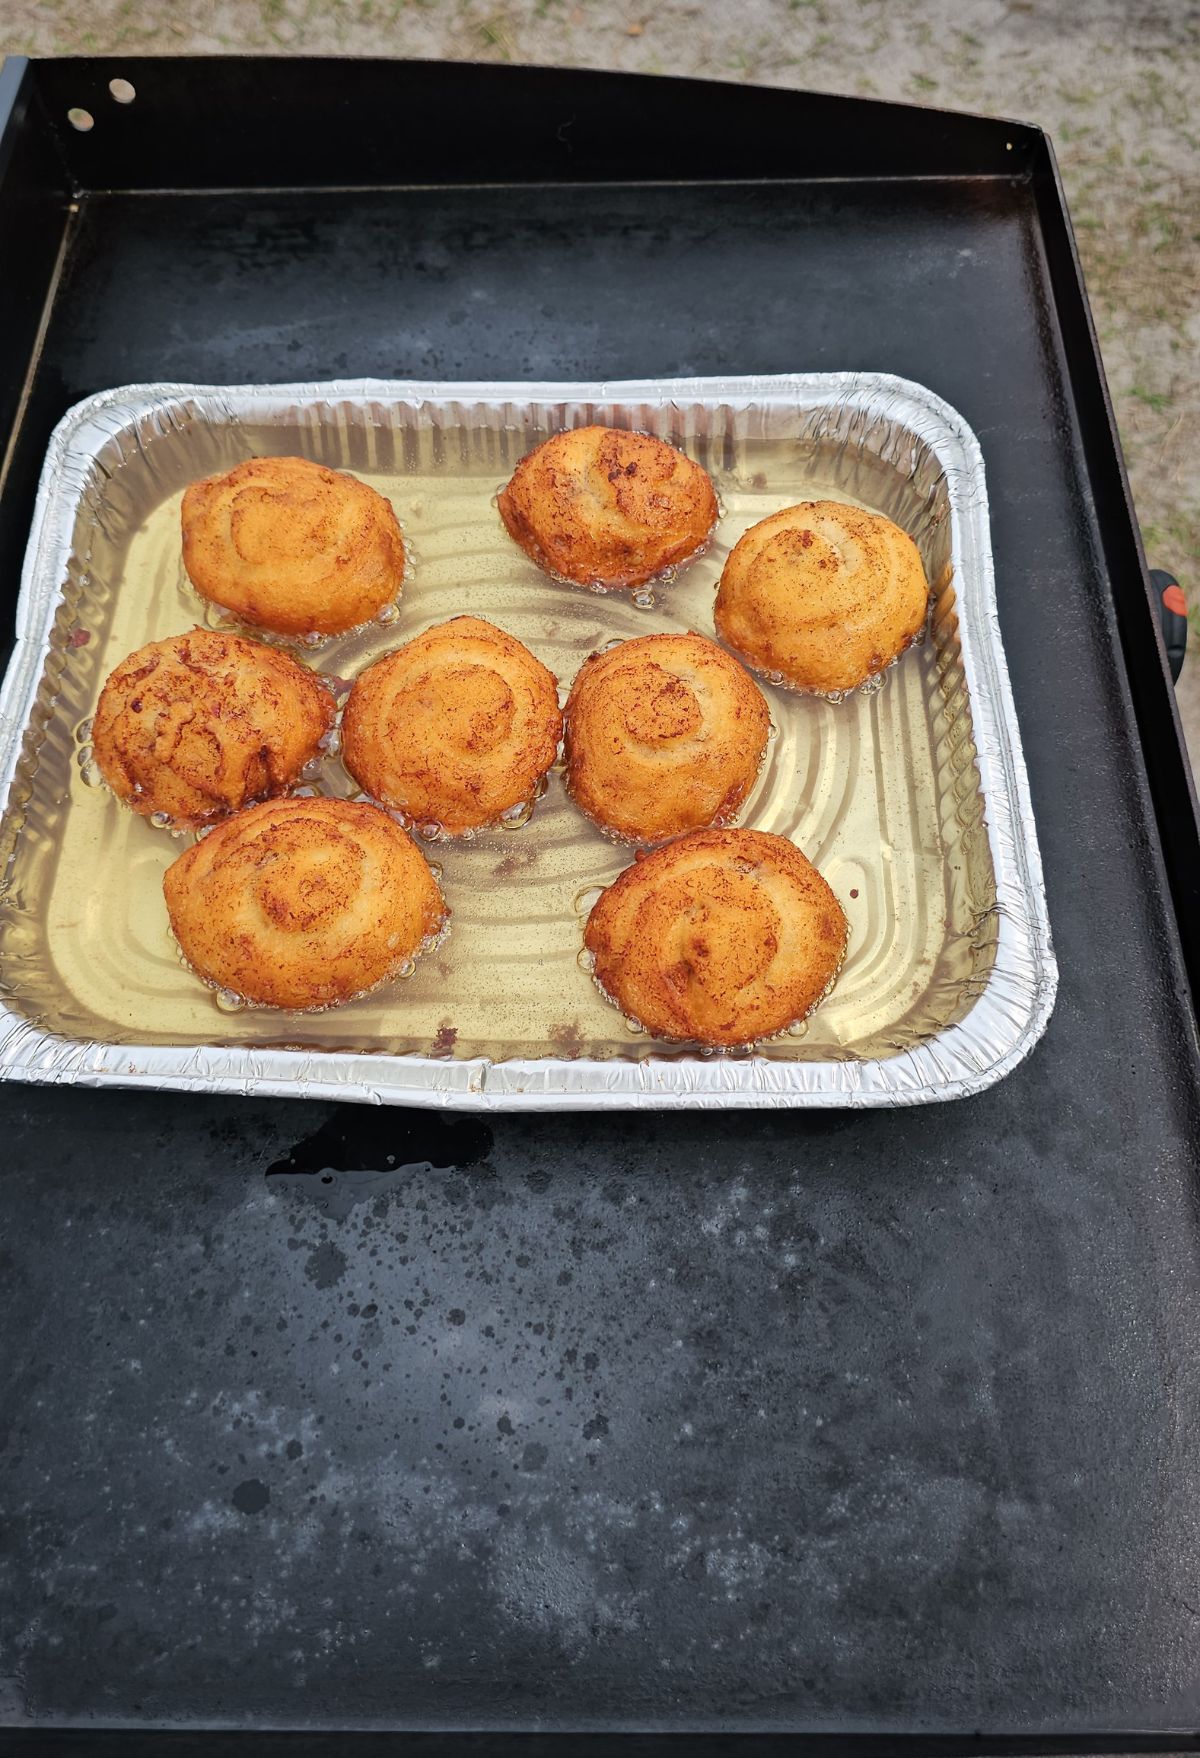 Grilled cheese rounds on a disposable aluminum tray.